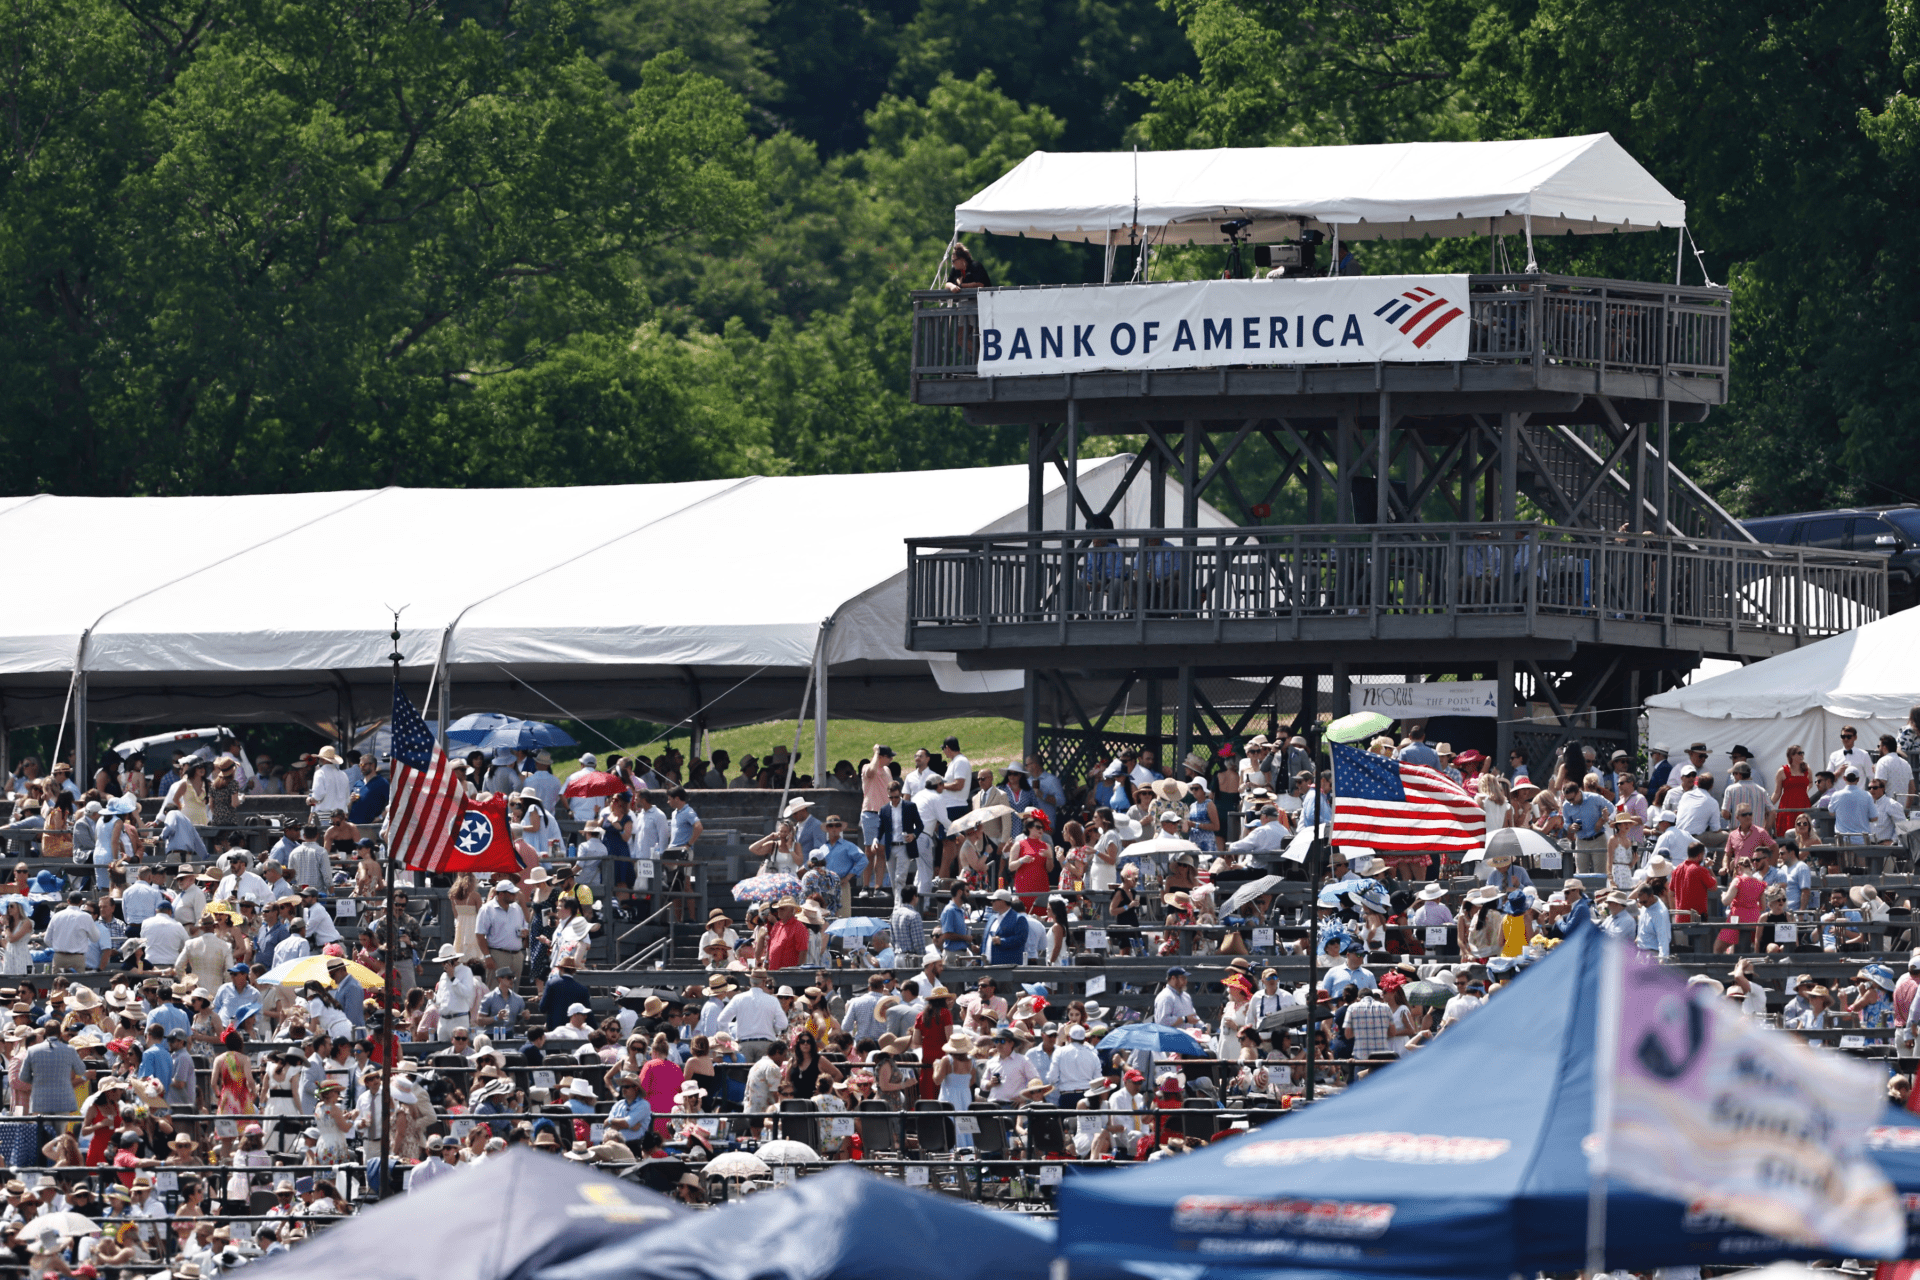 The sold-out box seat area at Iroquois Steeplechase, sponsored by Bank of America copy